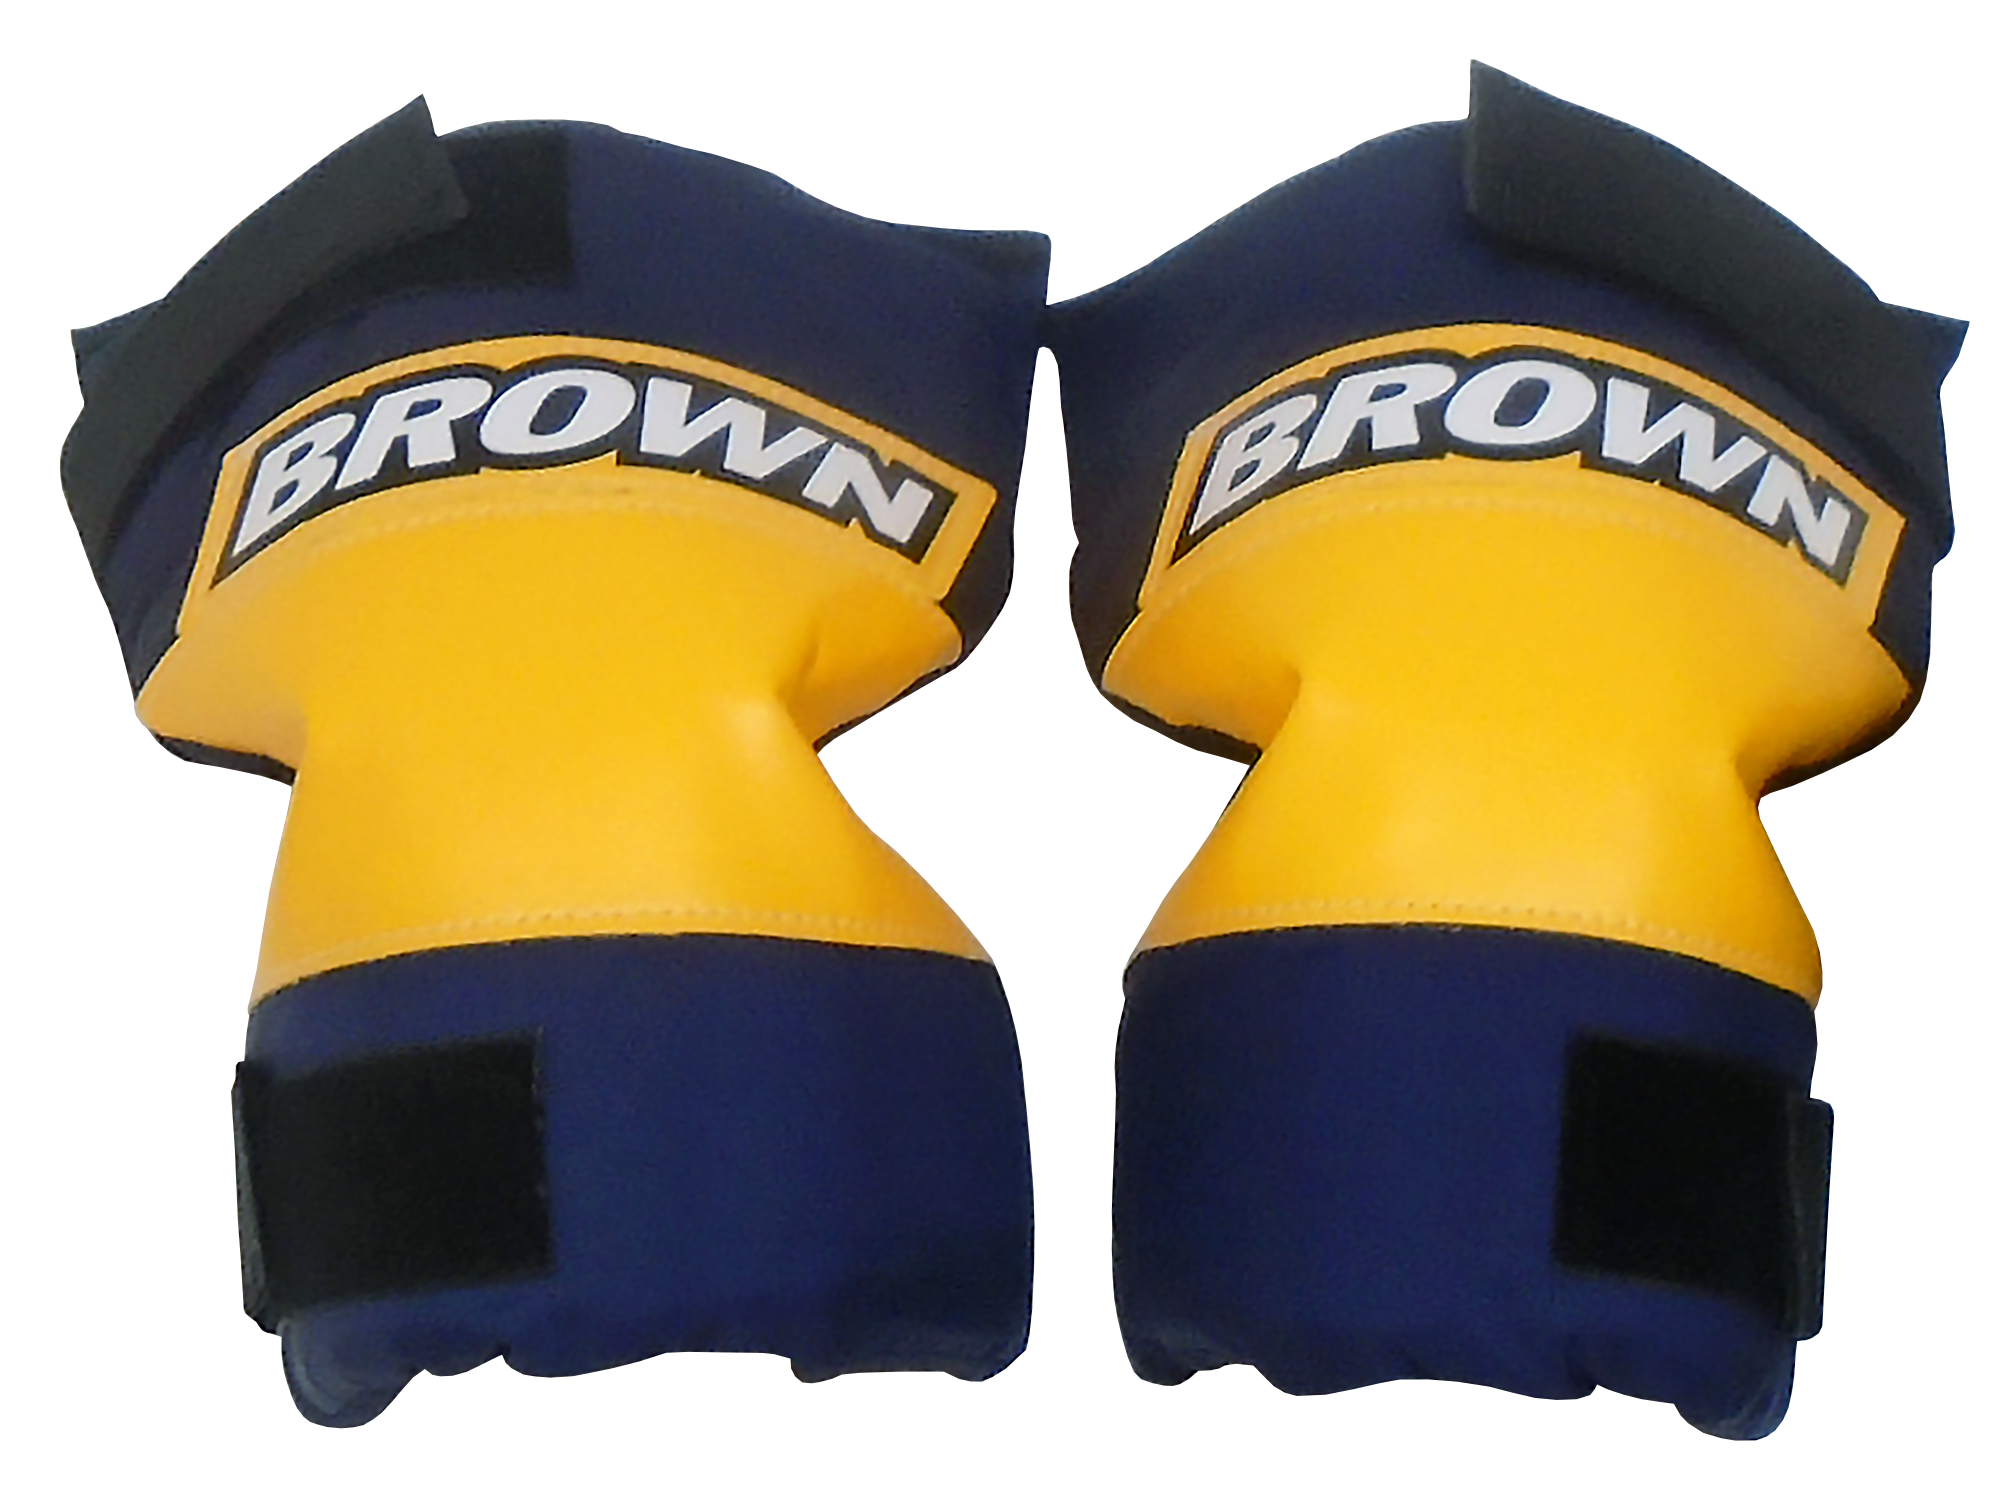 Yellow and blue knee pads